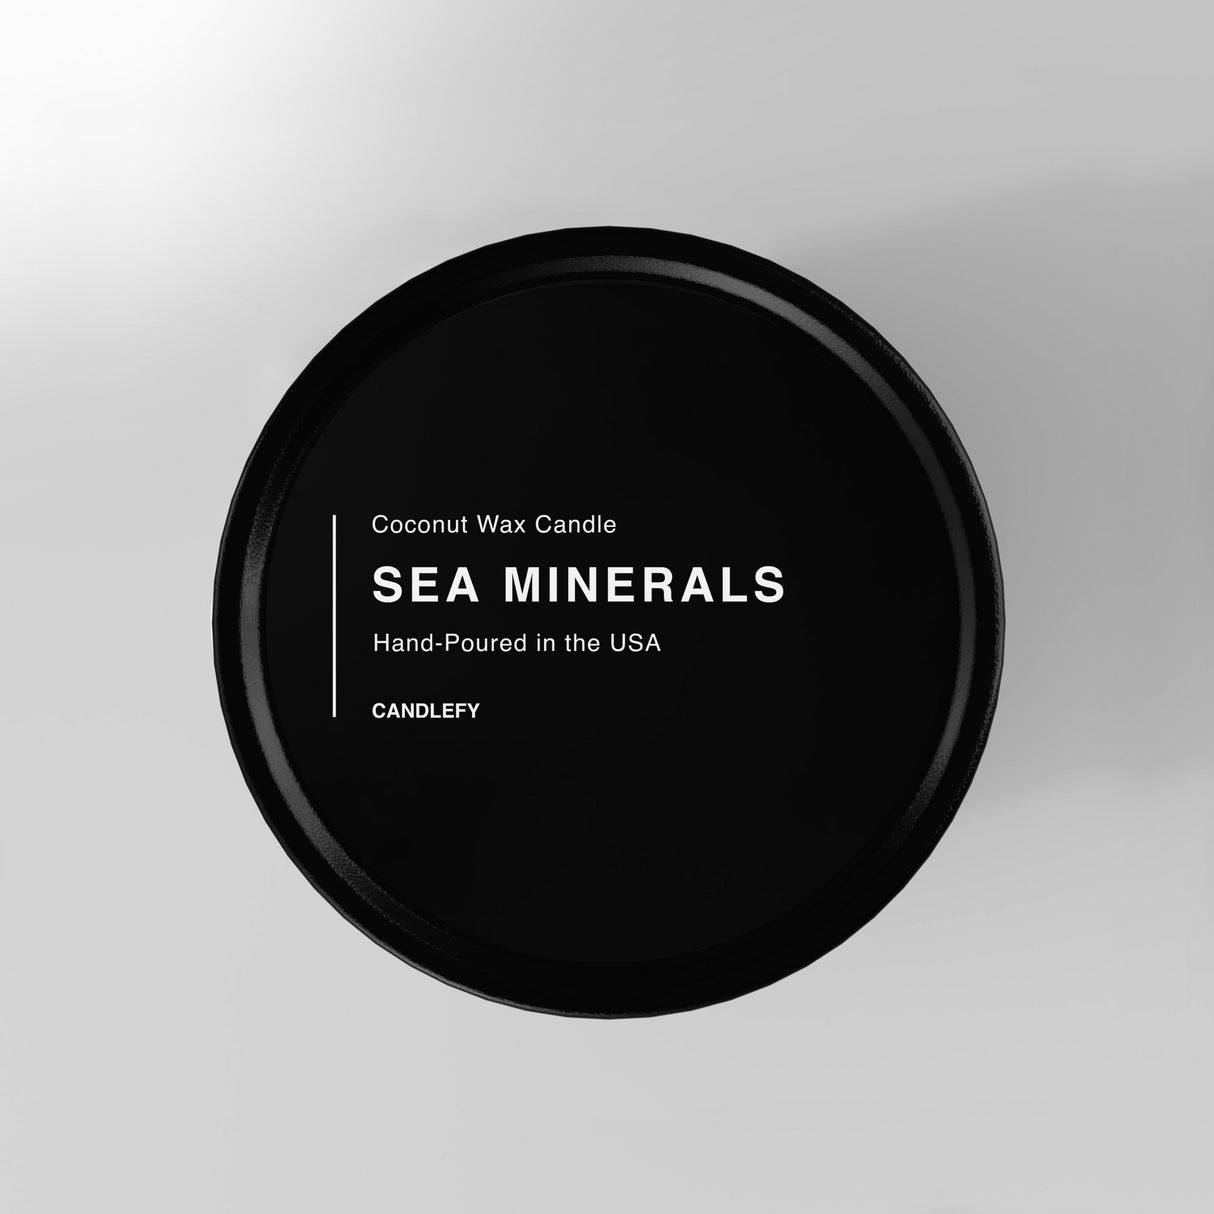 Sea Minerals Natural Wax Scented Candle in Black Travel Tin - Candlefy